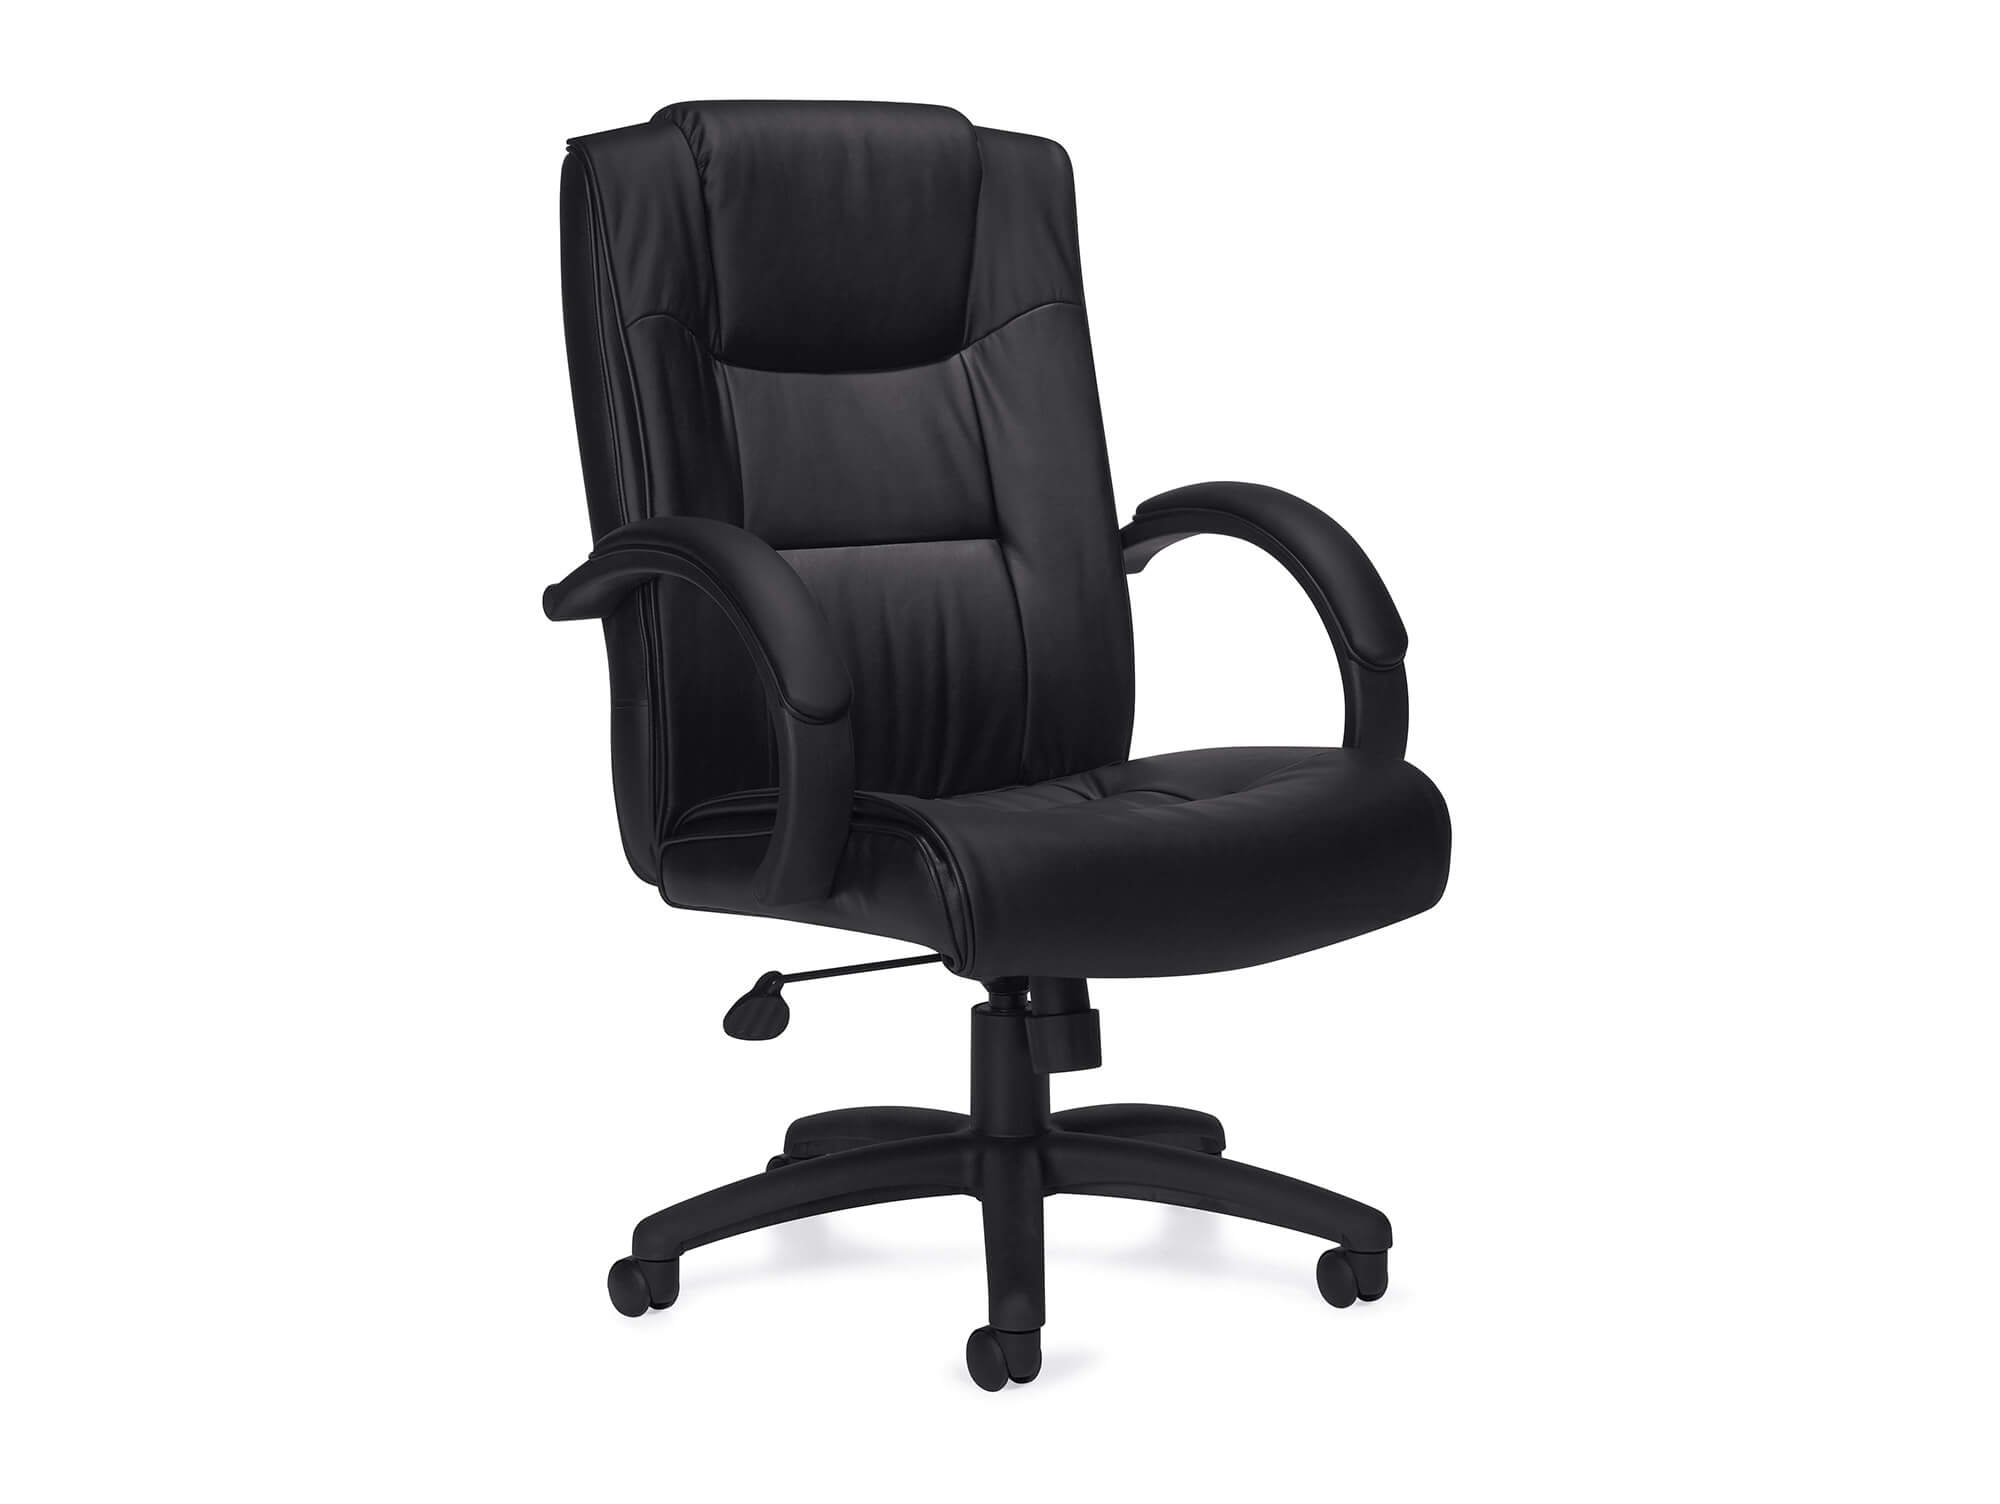 chairs-for-office-executive-high-back-office-chairs.jpg